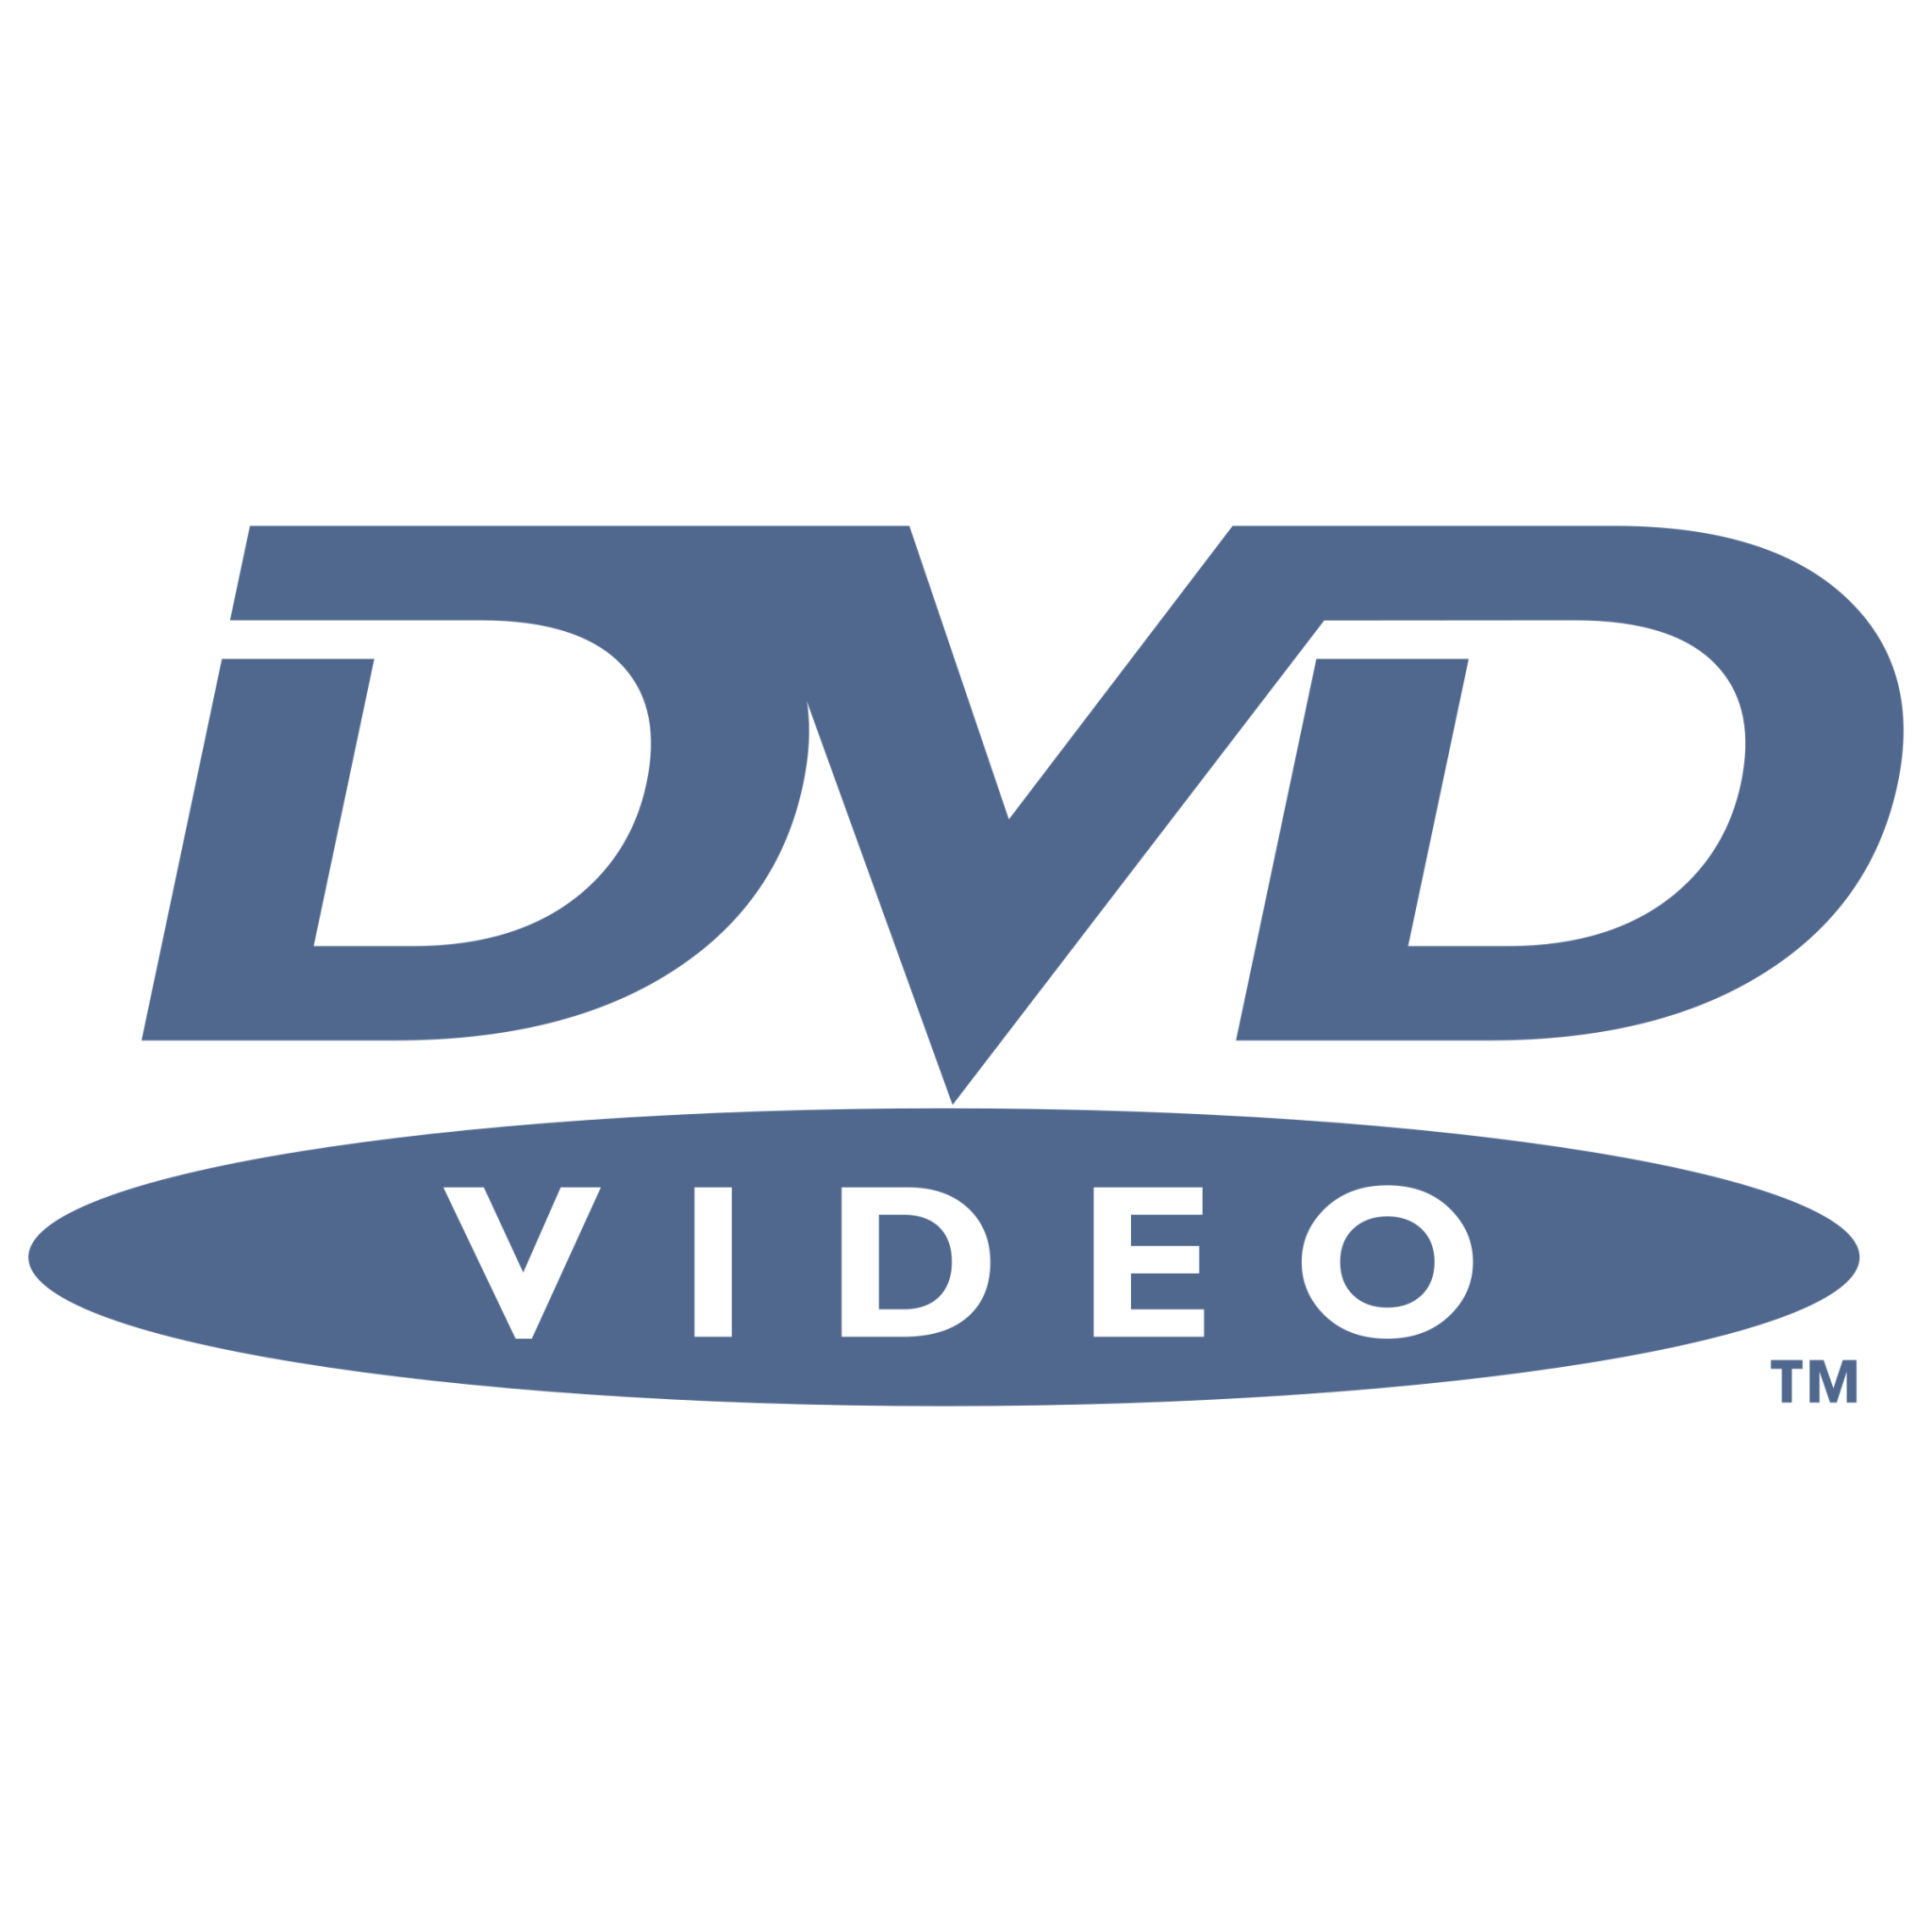 Dvd Video Logo Png - Download Free Png Images